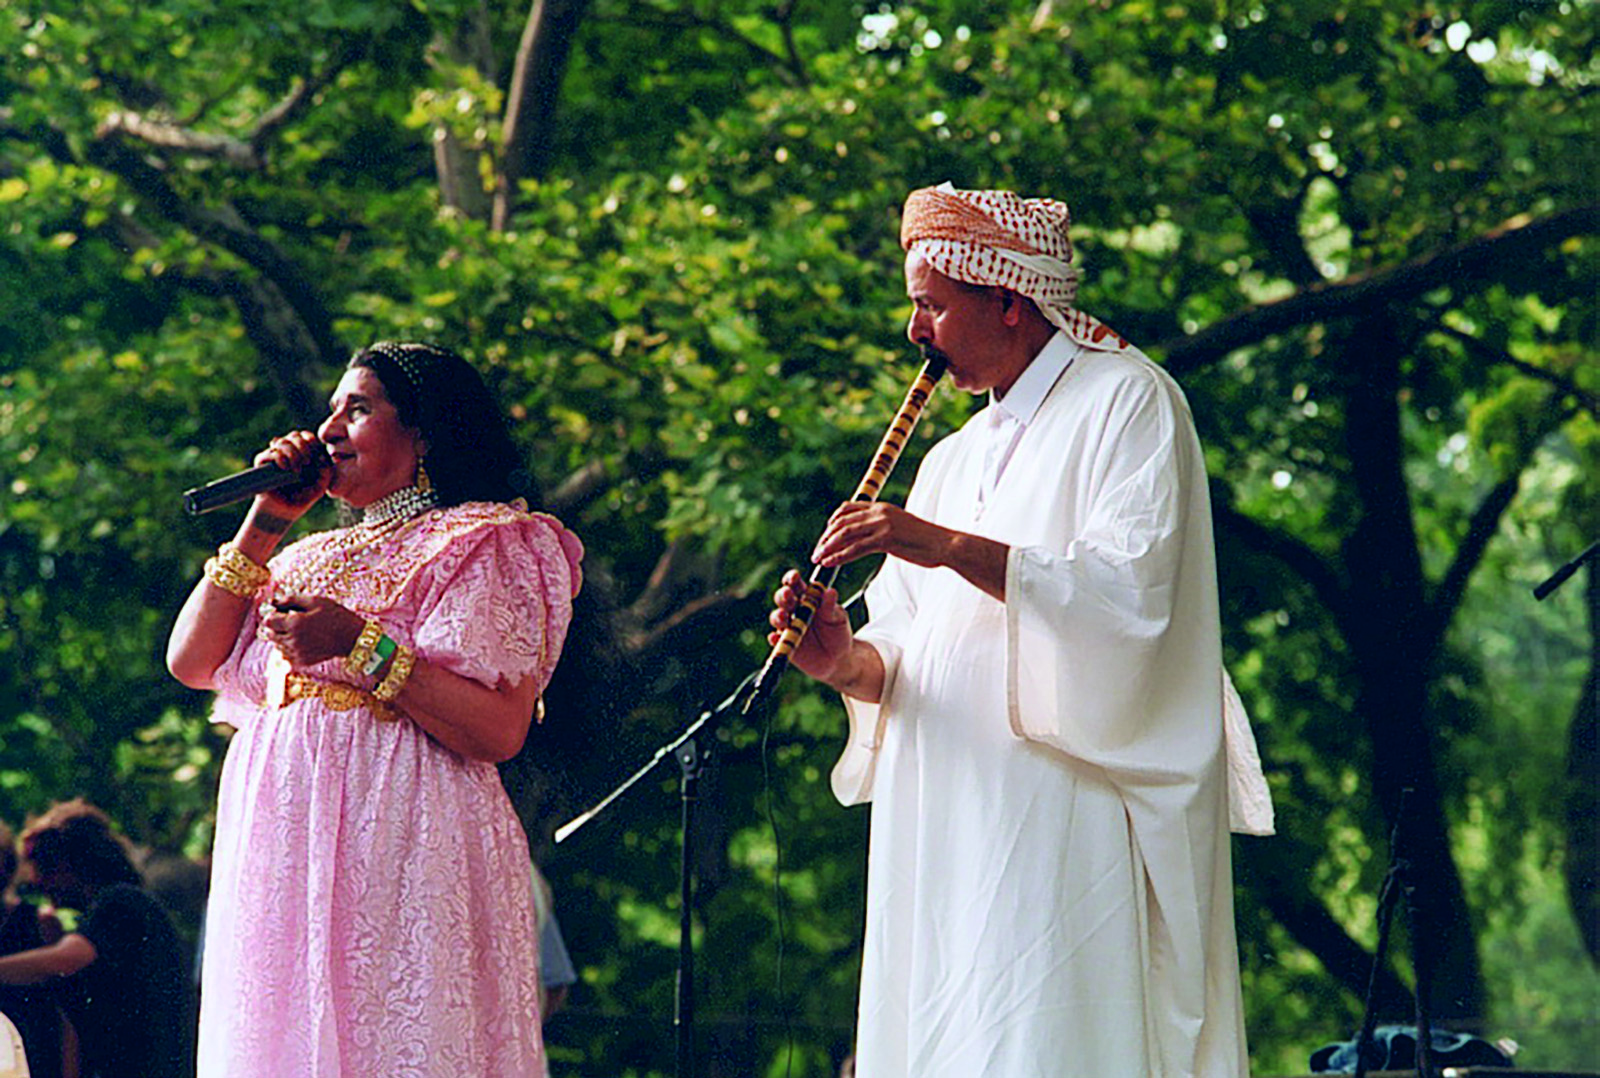 After decades of fame in Algeria and across North Africa, Remitti toured Europe and Asia. Her New York performance, right, was sponsored by the French government as part of “Vive La World,” an annual showcase for world-music acts.